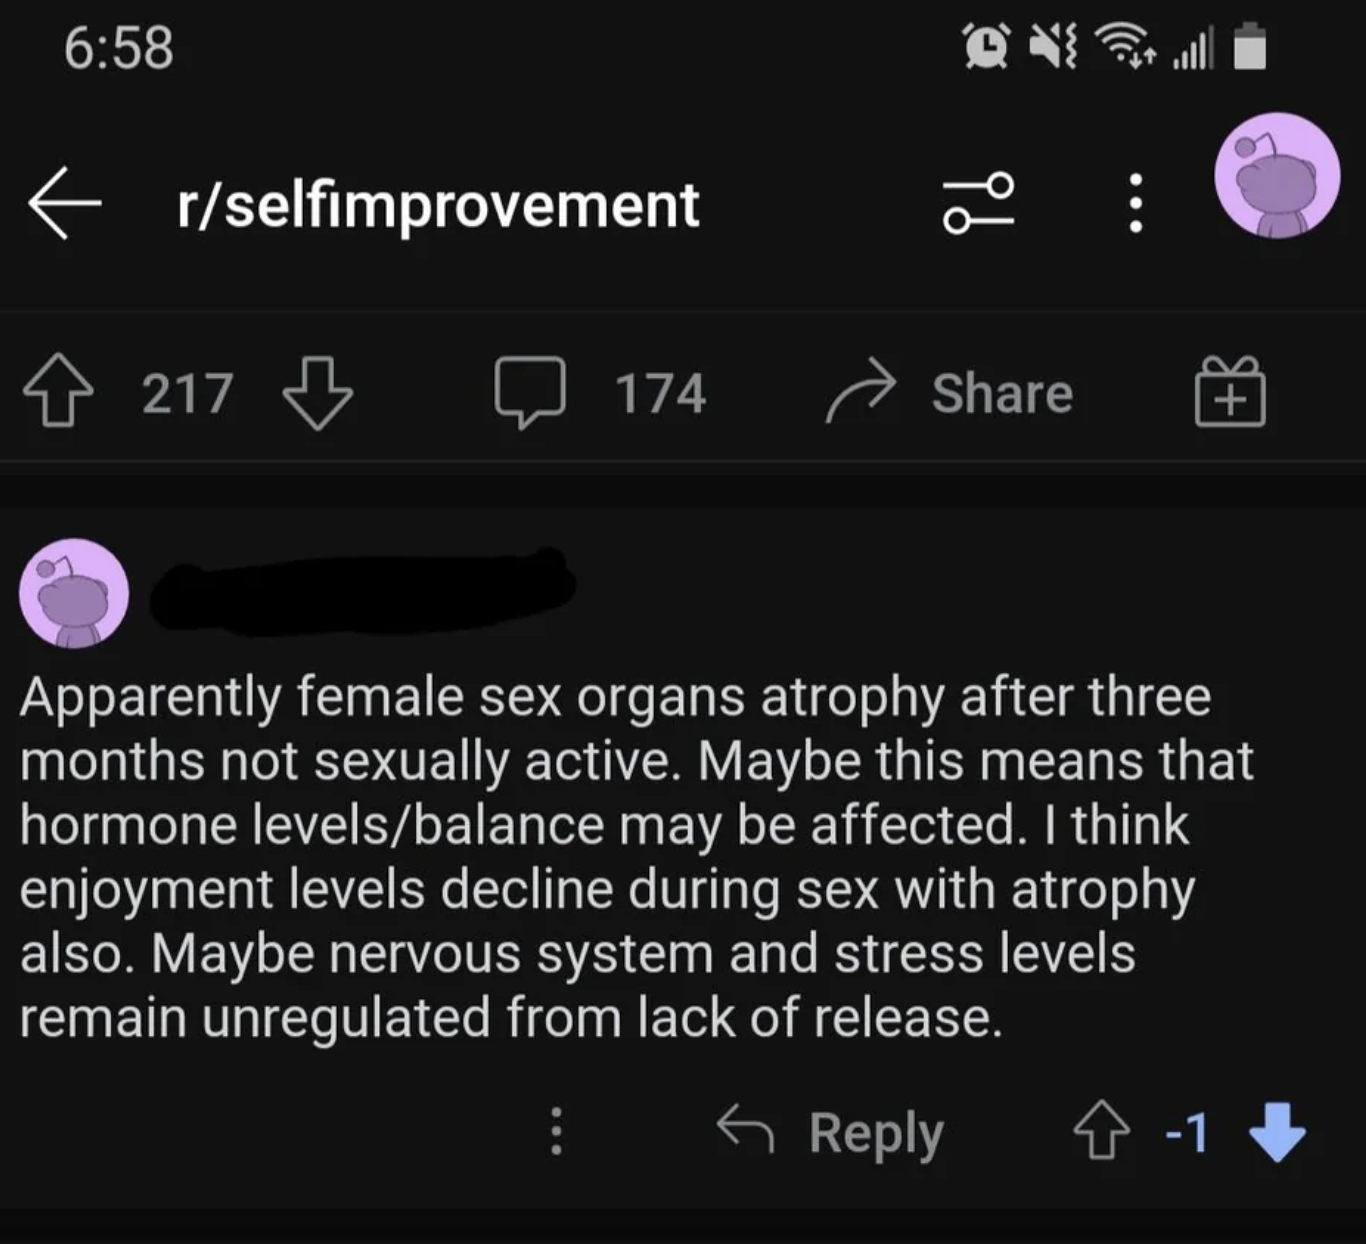 &quot;Apparently female sex organs atrophy after three months not sexually active; maybe hormone levels/balance may be affected; I think enjoyment levels decline during sex with atrophy also; maybe nervous system and stress levels remain unregulated&quot;